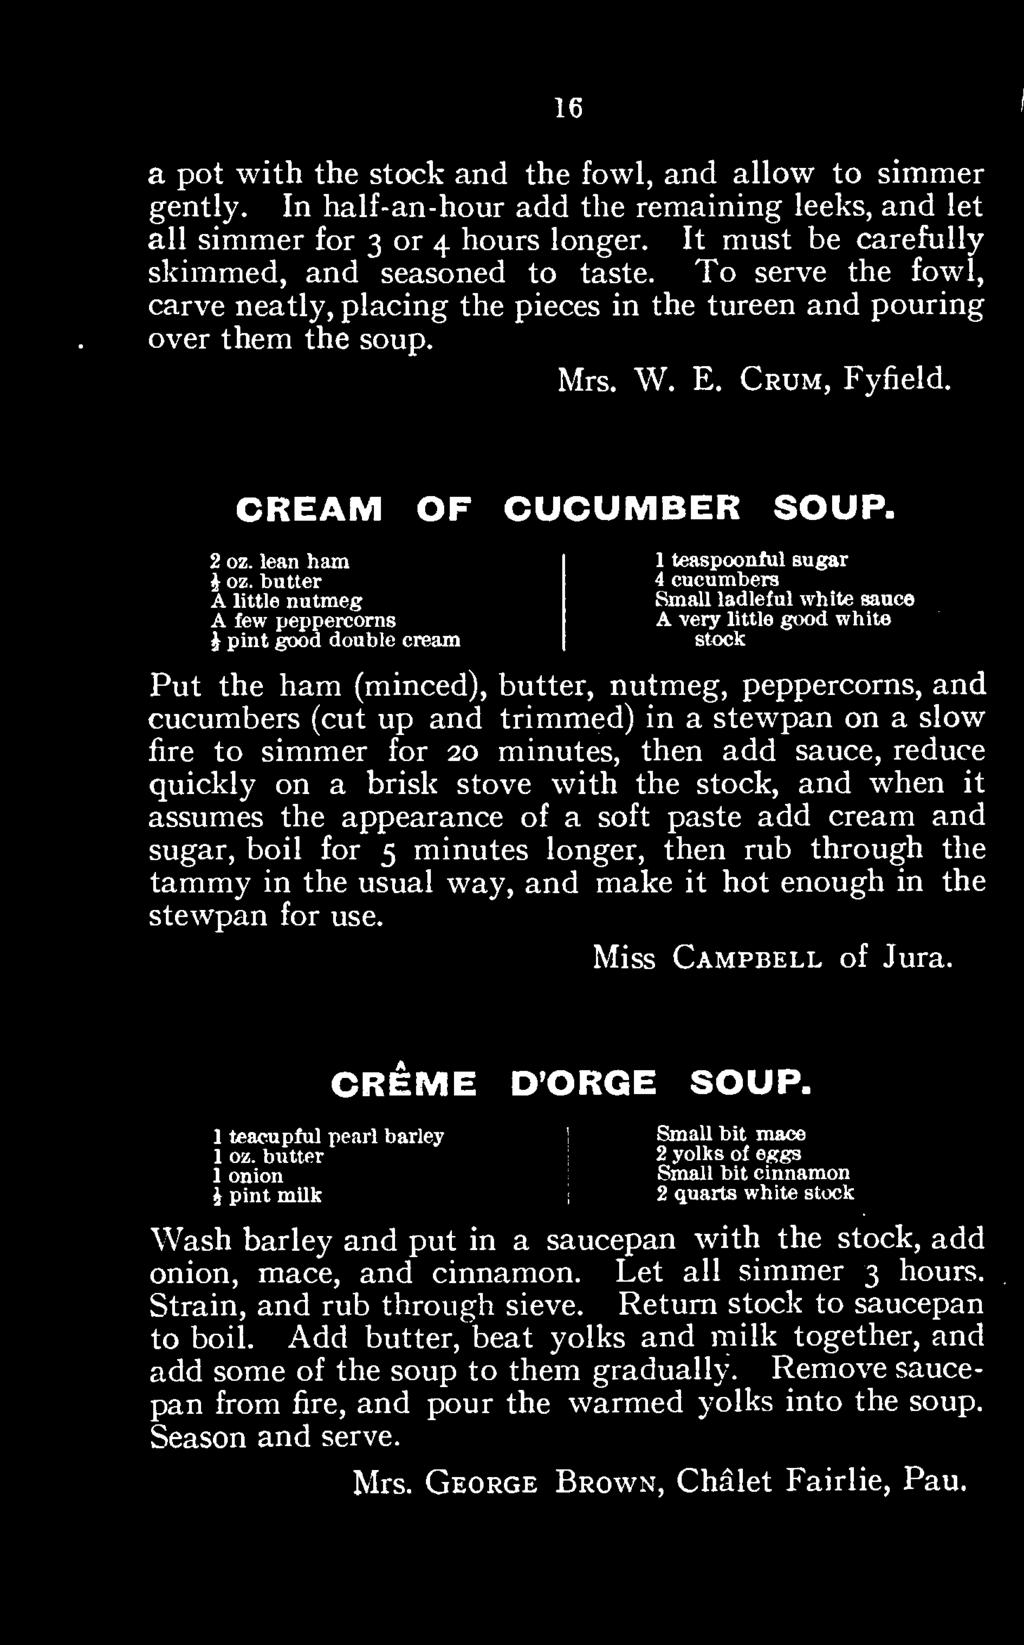 appearance of a soft paste add cream and sugar, boil for 5 minutes longer, then rub through the tammy in the usual way, and make it hot enough in the stewpan for use. Miss Campbell of Jura.